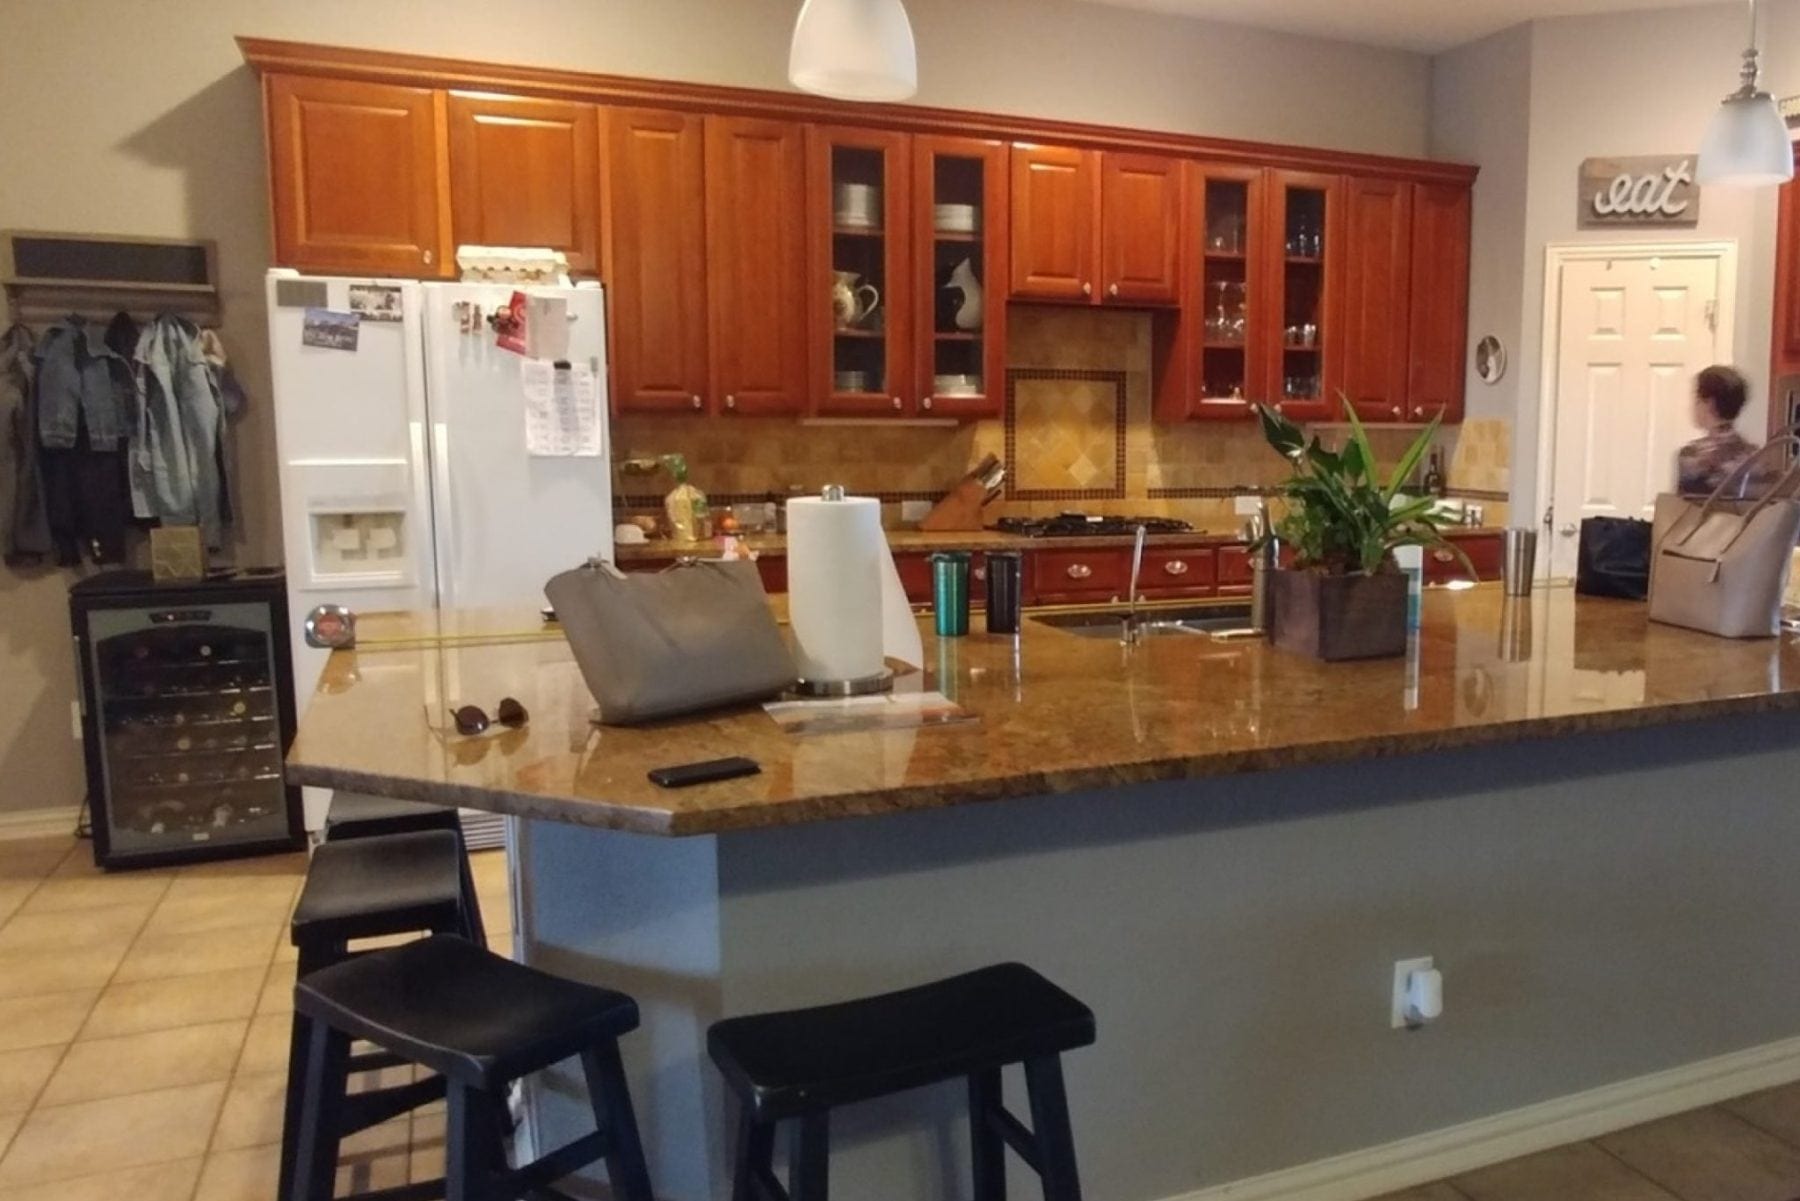 The Owner wanted to change the cabinets, floors,  back-splash, and countertops